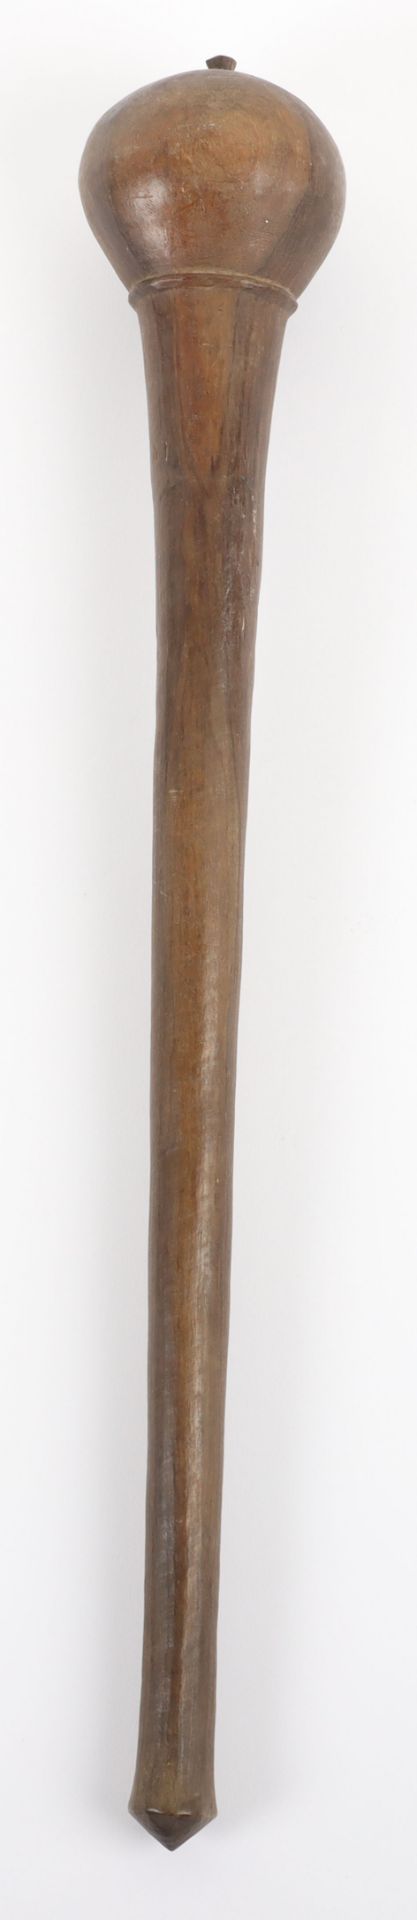 Carved Wooden Club, Possibly South African